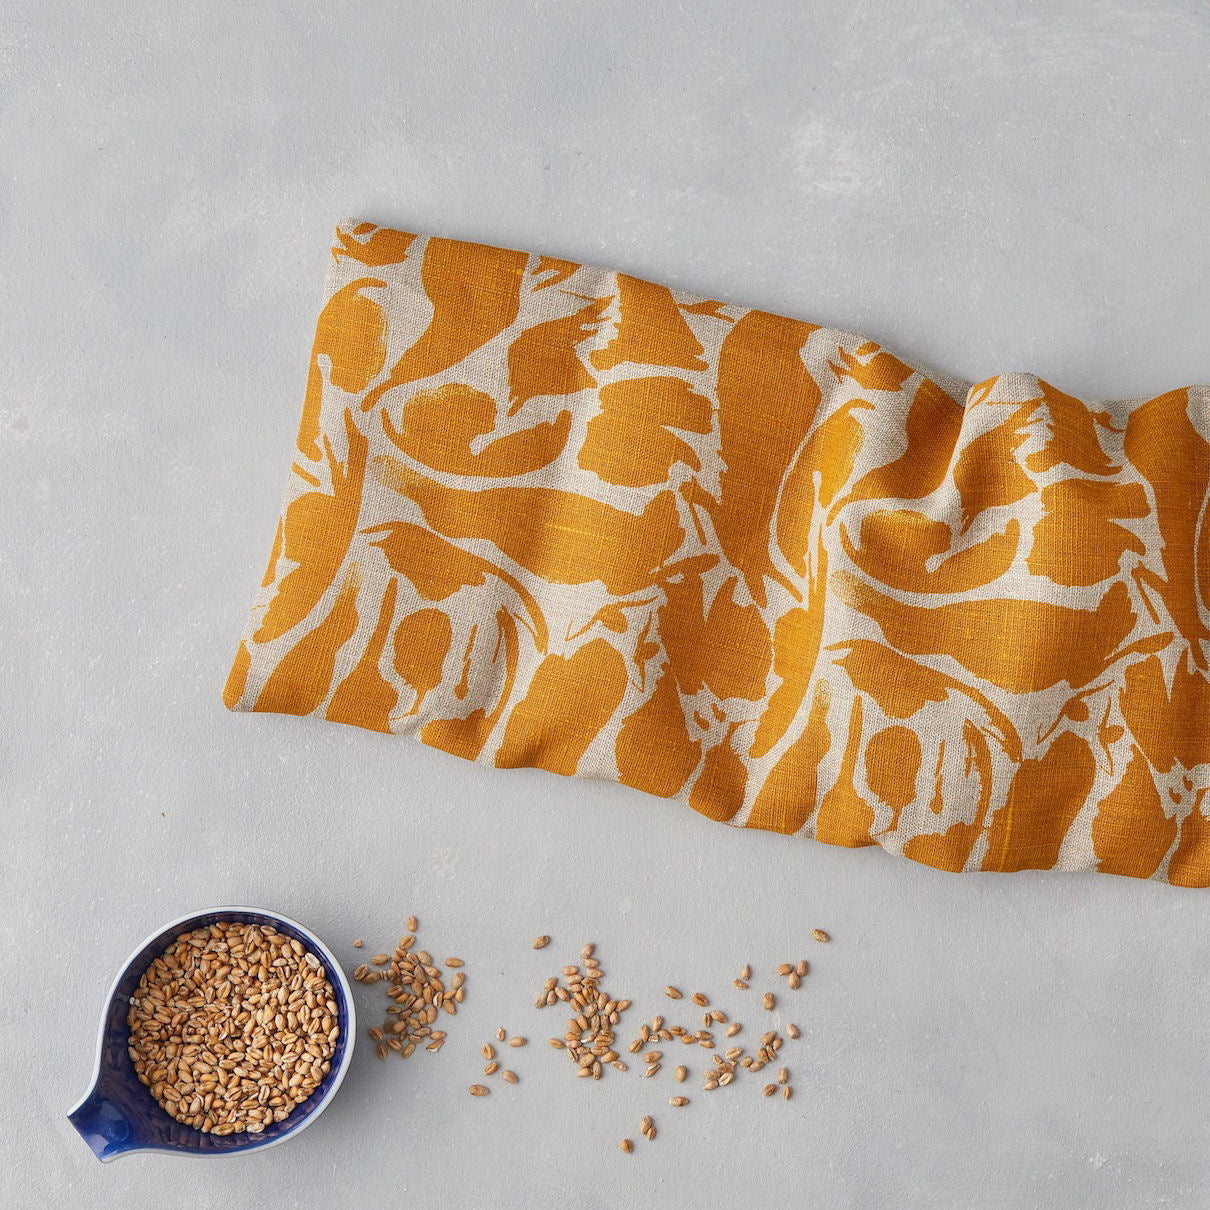 Linen Hot and Cold Wheat Bag - Mustard